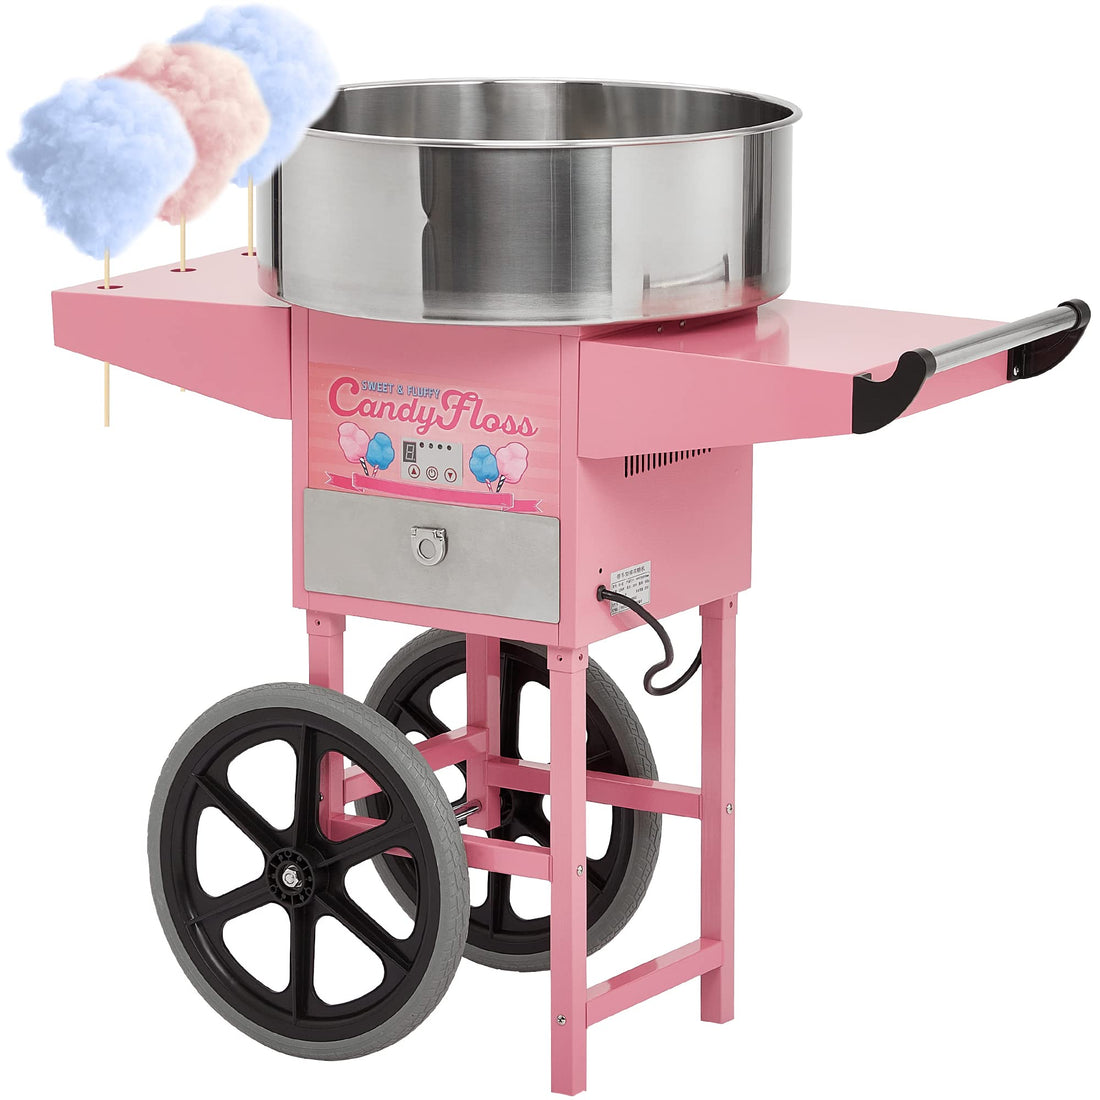 1050W Commercial Cotton Candy Machine with Cart – Adjustable Temp, Versatile Use, Easy & Safe, Ideal for Events